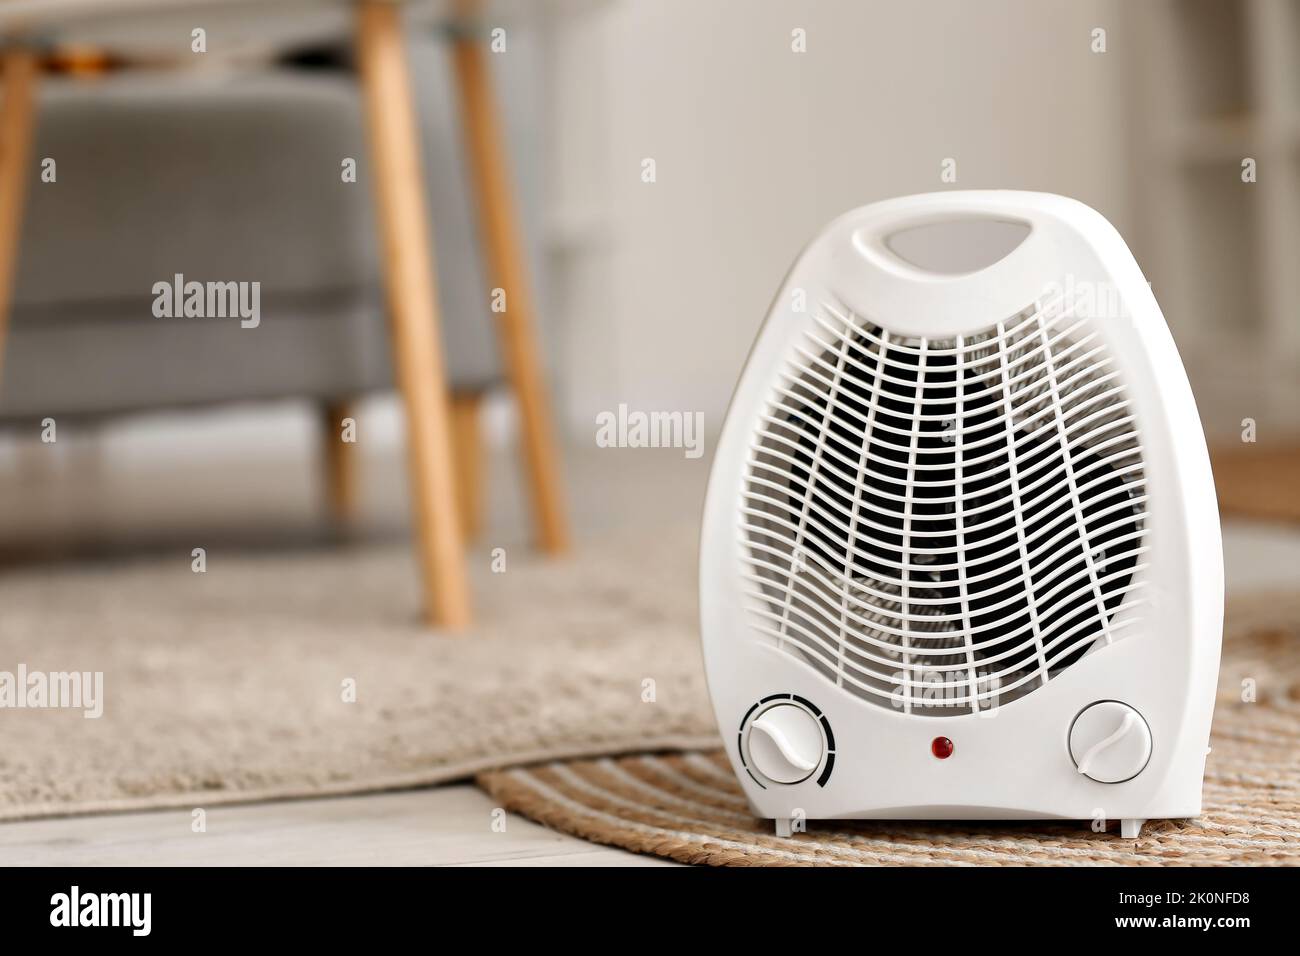 Electric fan heater on rug in living room Stock Photo